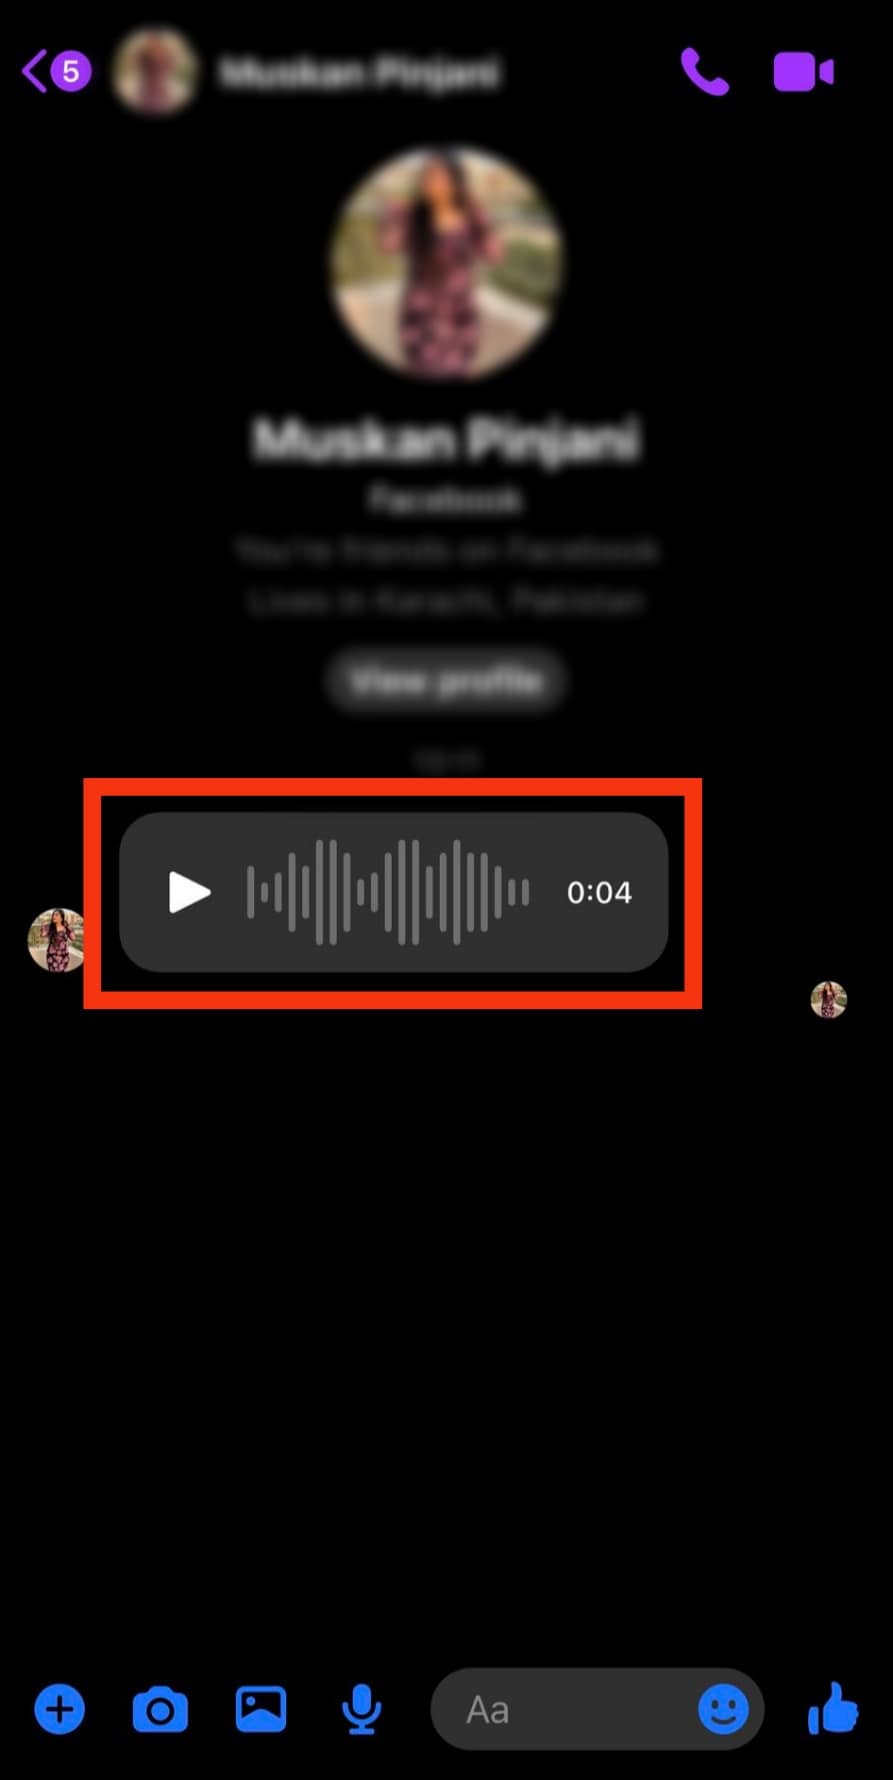 Scroll To The Audio Message